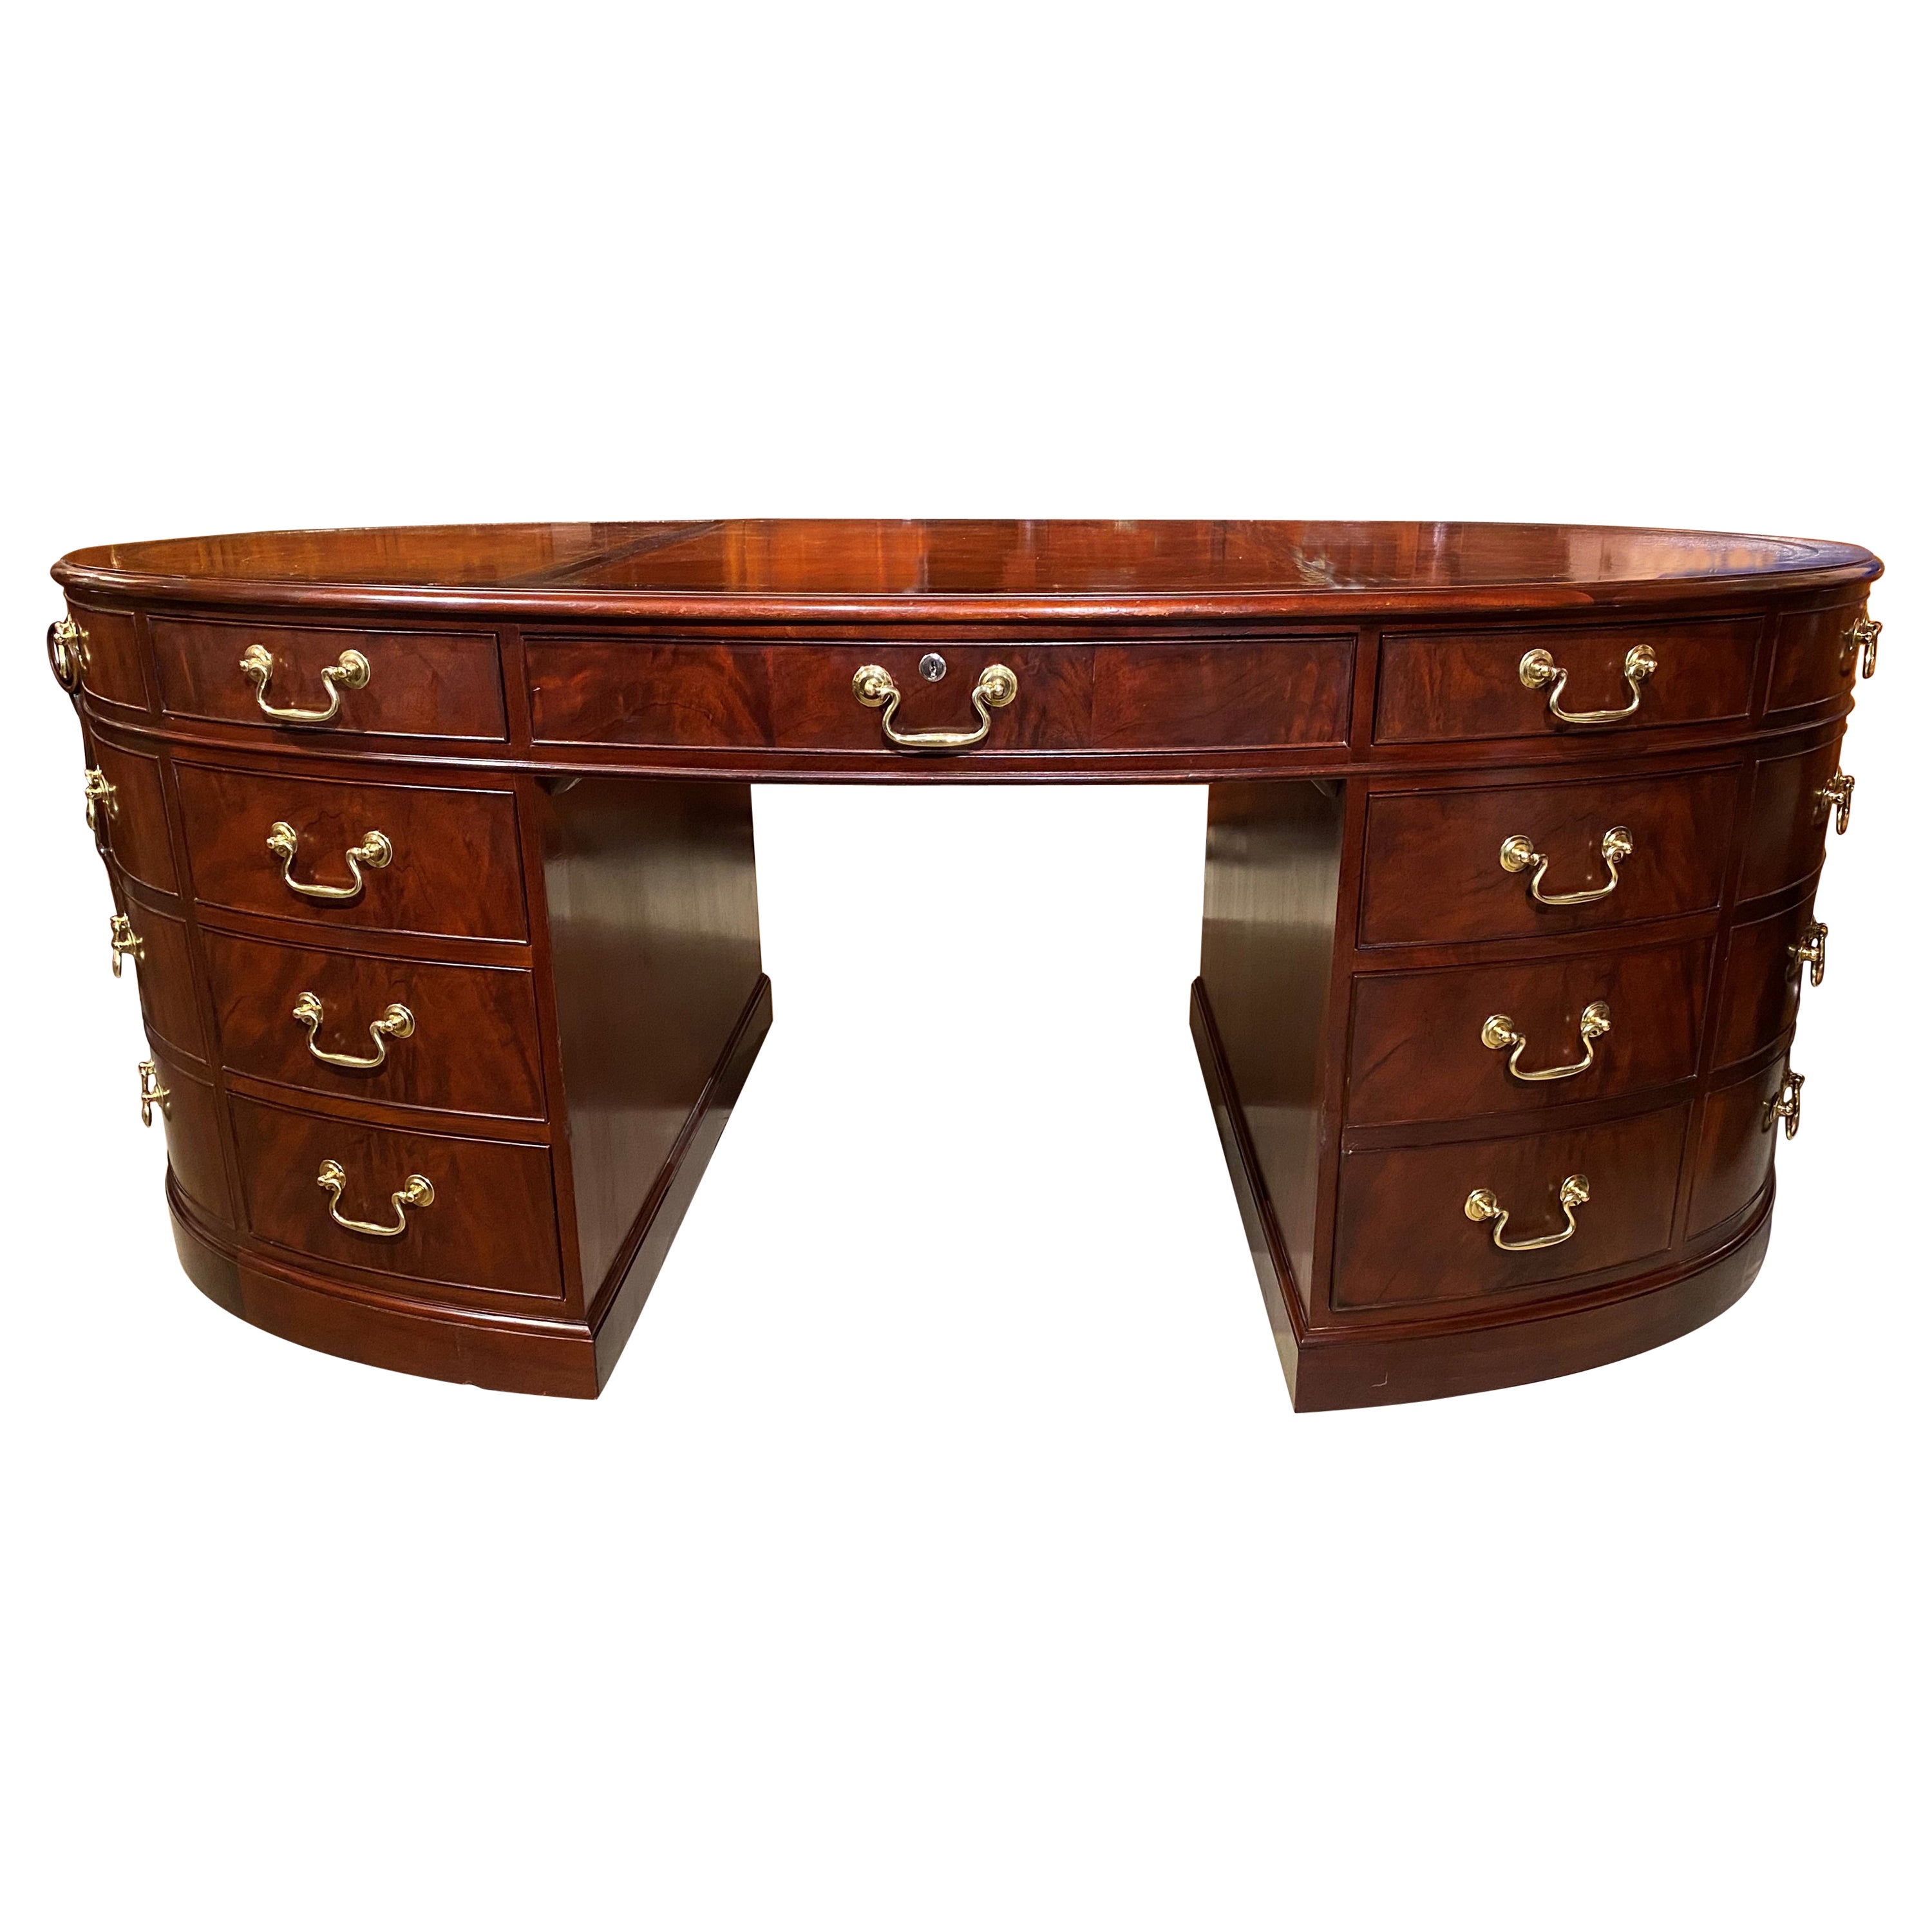 Exceptional Baker Furniture Oval Mahogany Leather Top Partners Desk